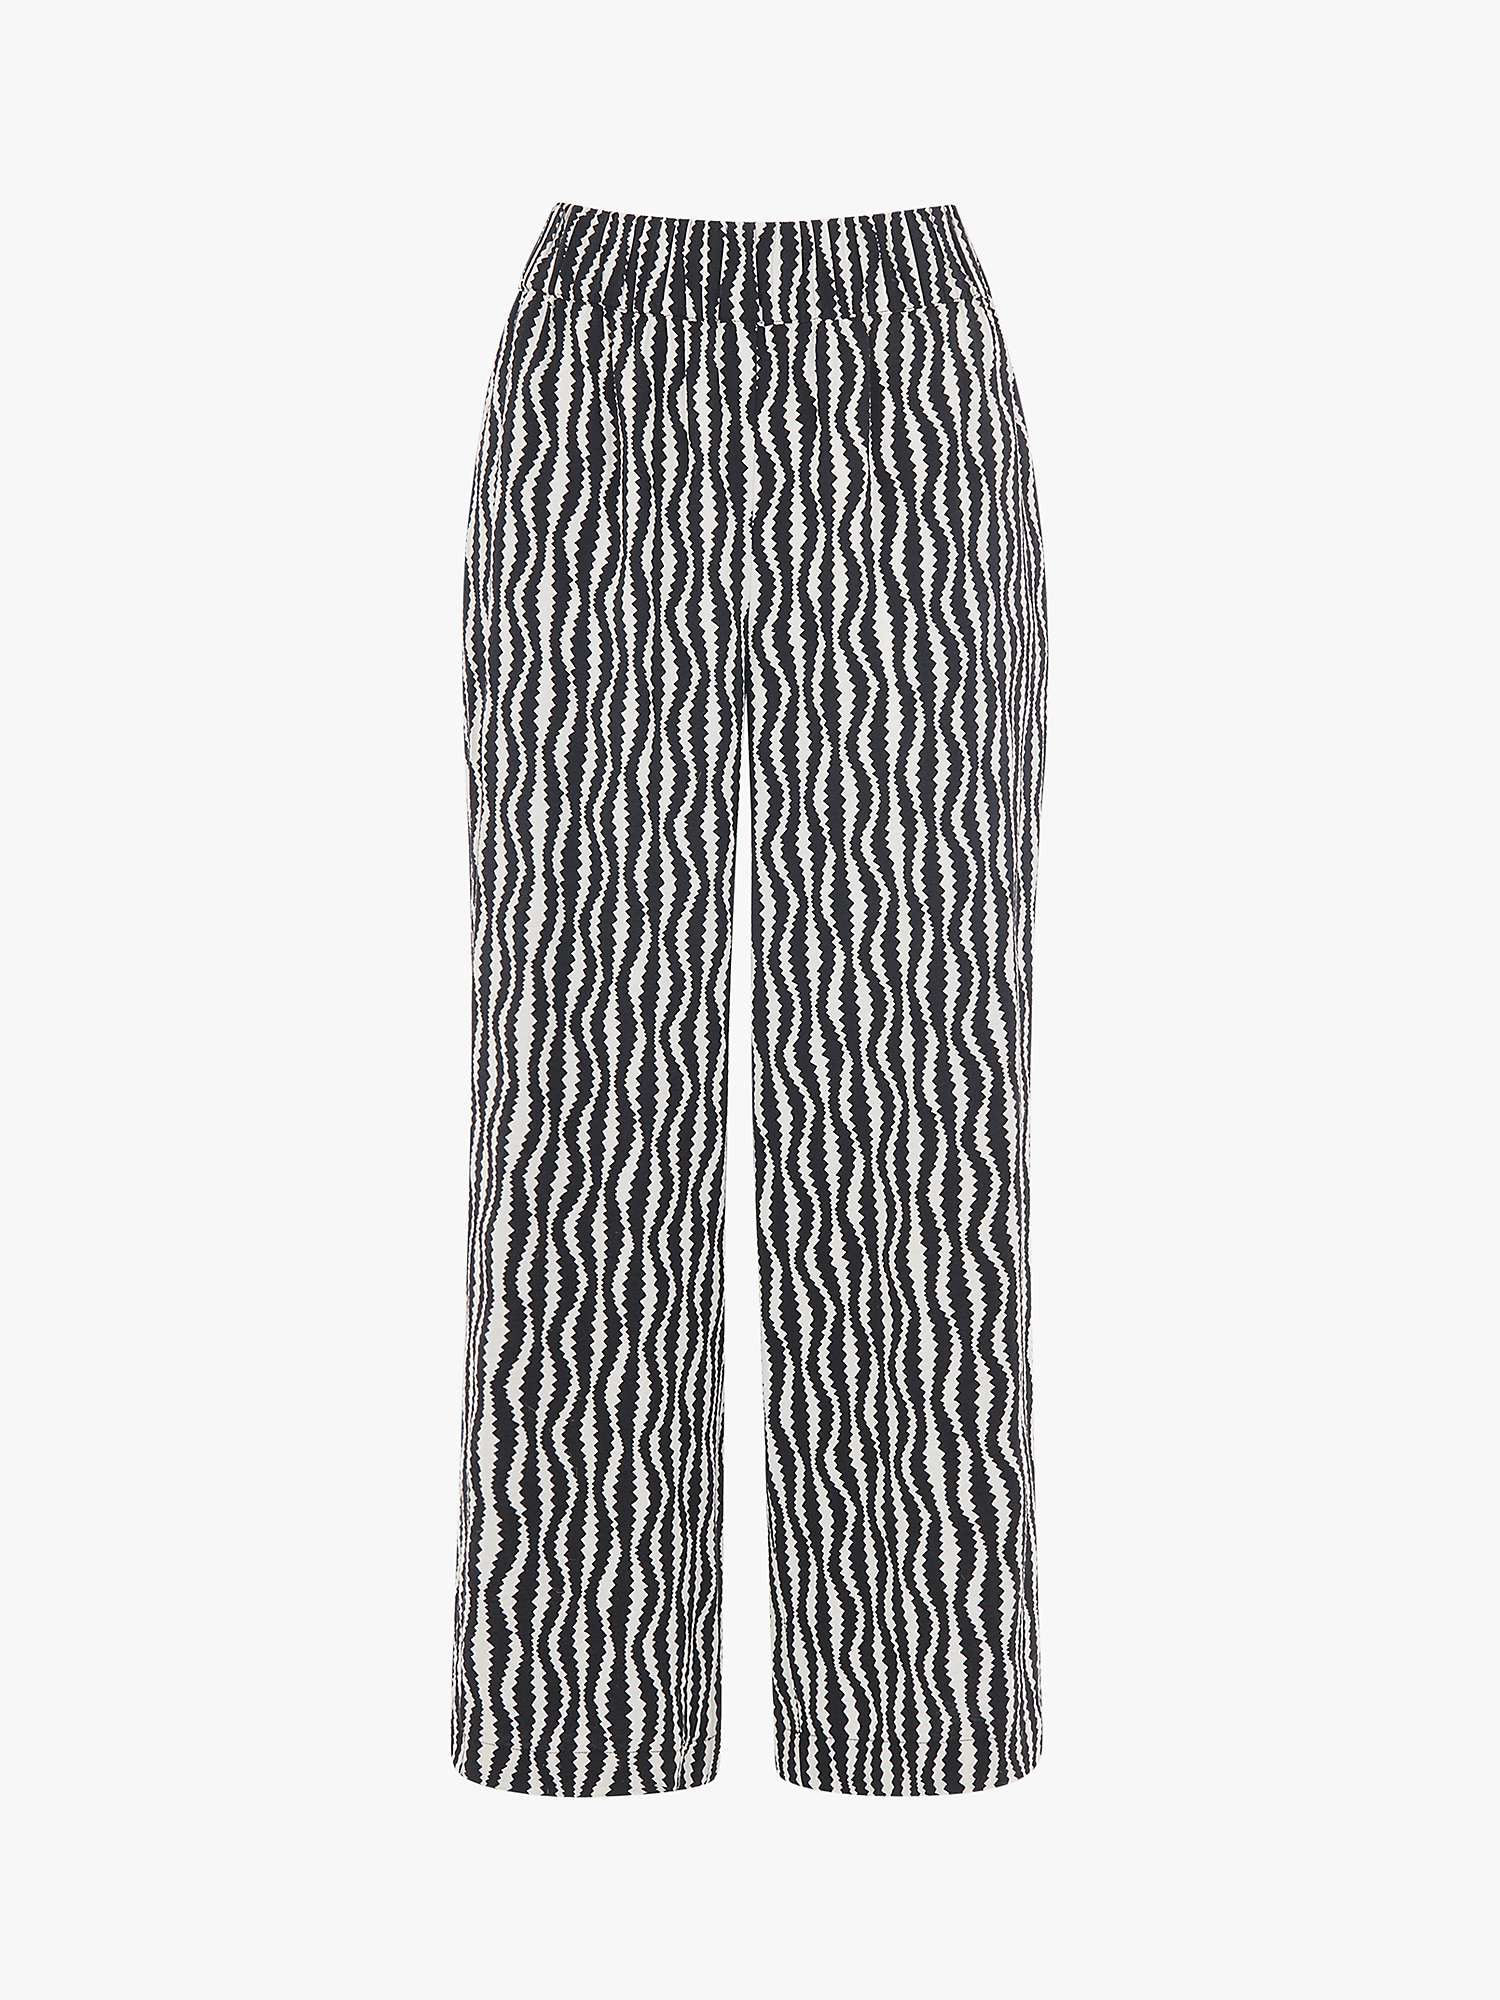 Whistles Optical Rope Cropped Trousers, Black/White at John Lewis ...